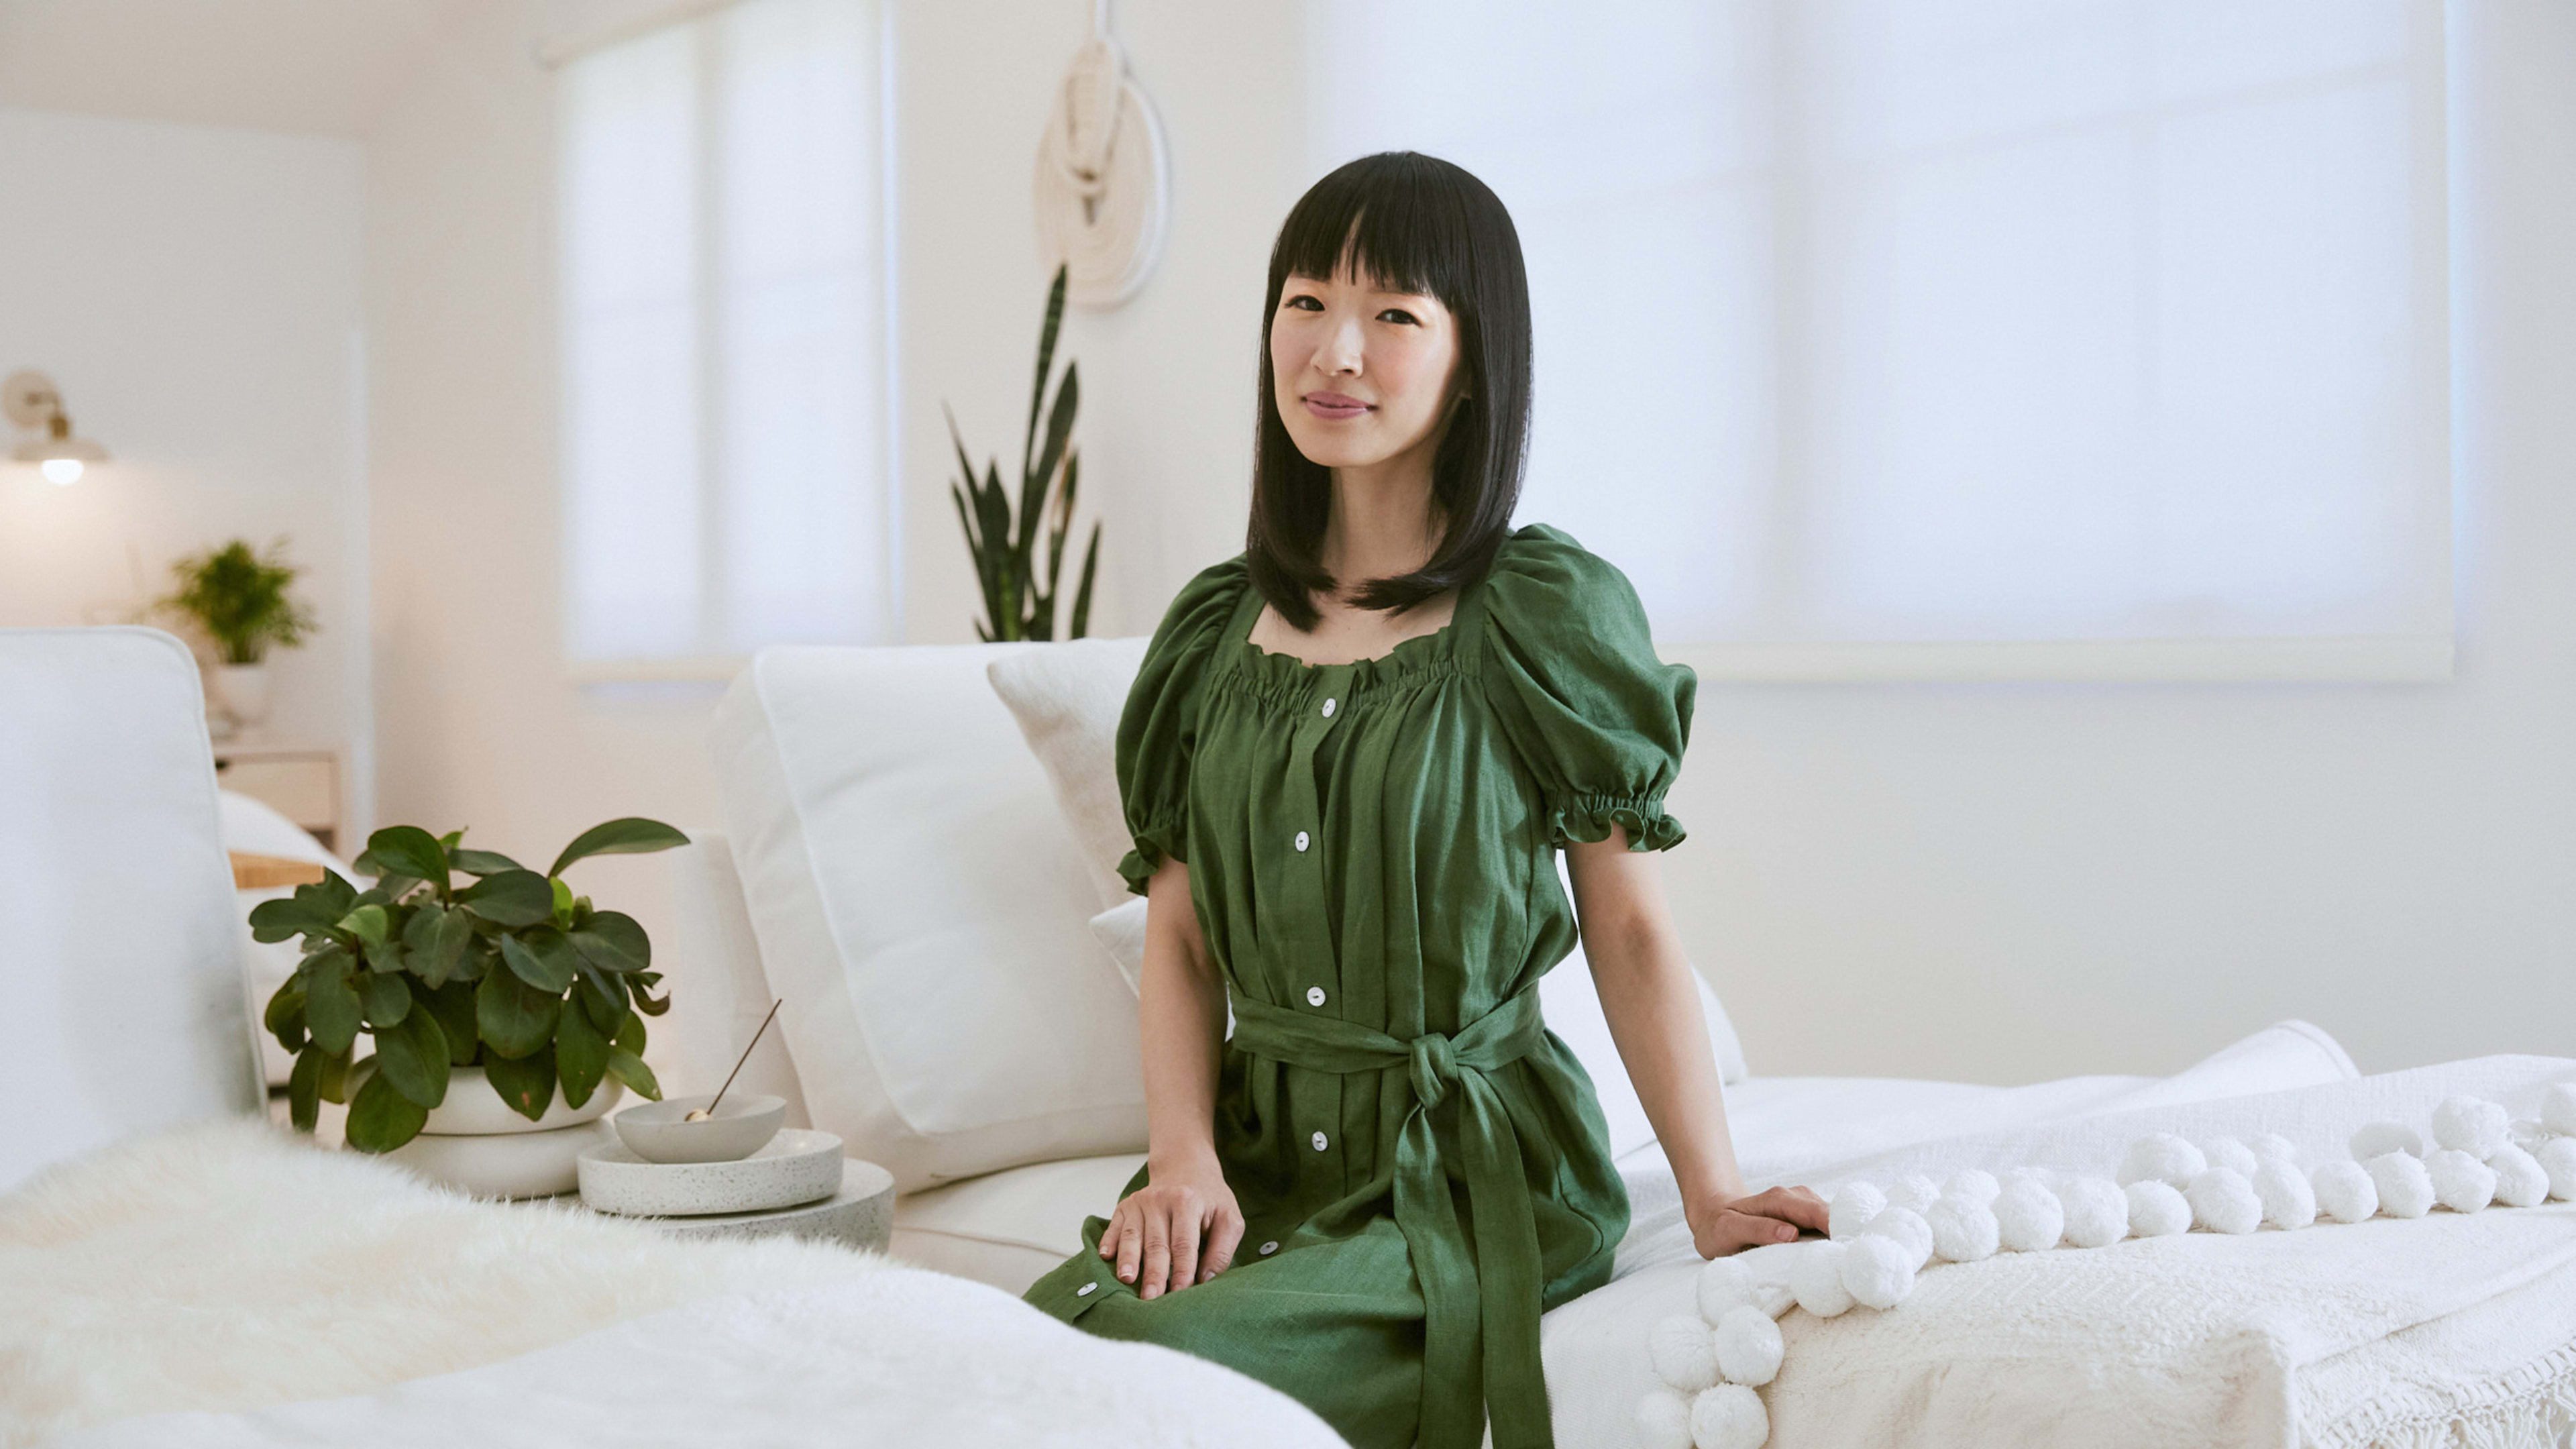 For $40, Marie Kondo will help you organize your chaotic home